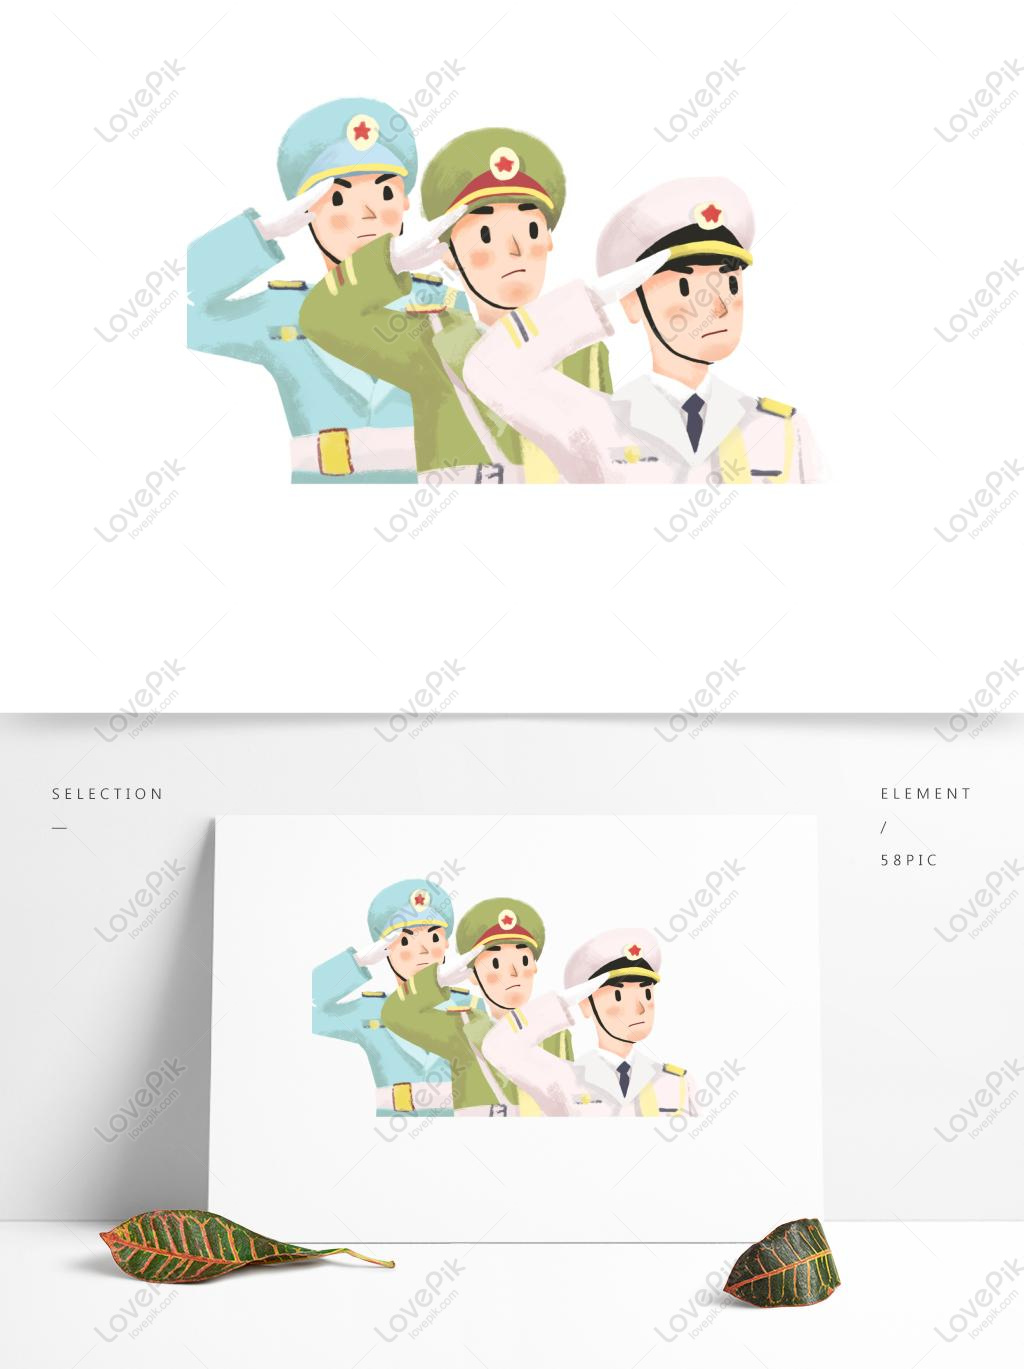 Hand Painted Cartoon Land Sea And Air Three Soldiers Original PNG  Transparent Background PSD images free download_1369 × 1024 px - Lovepik